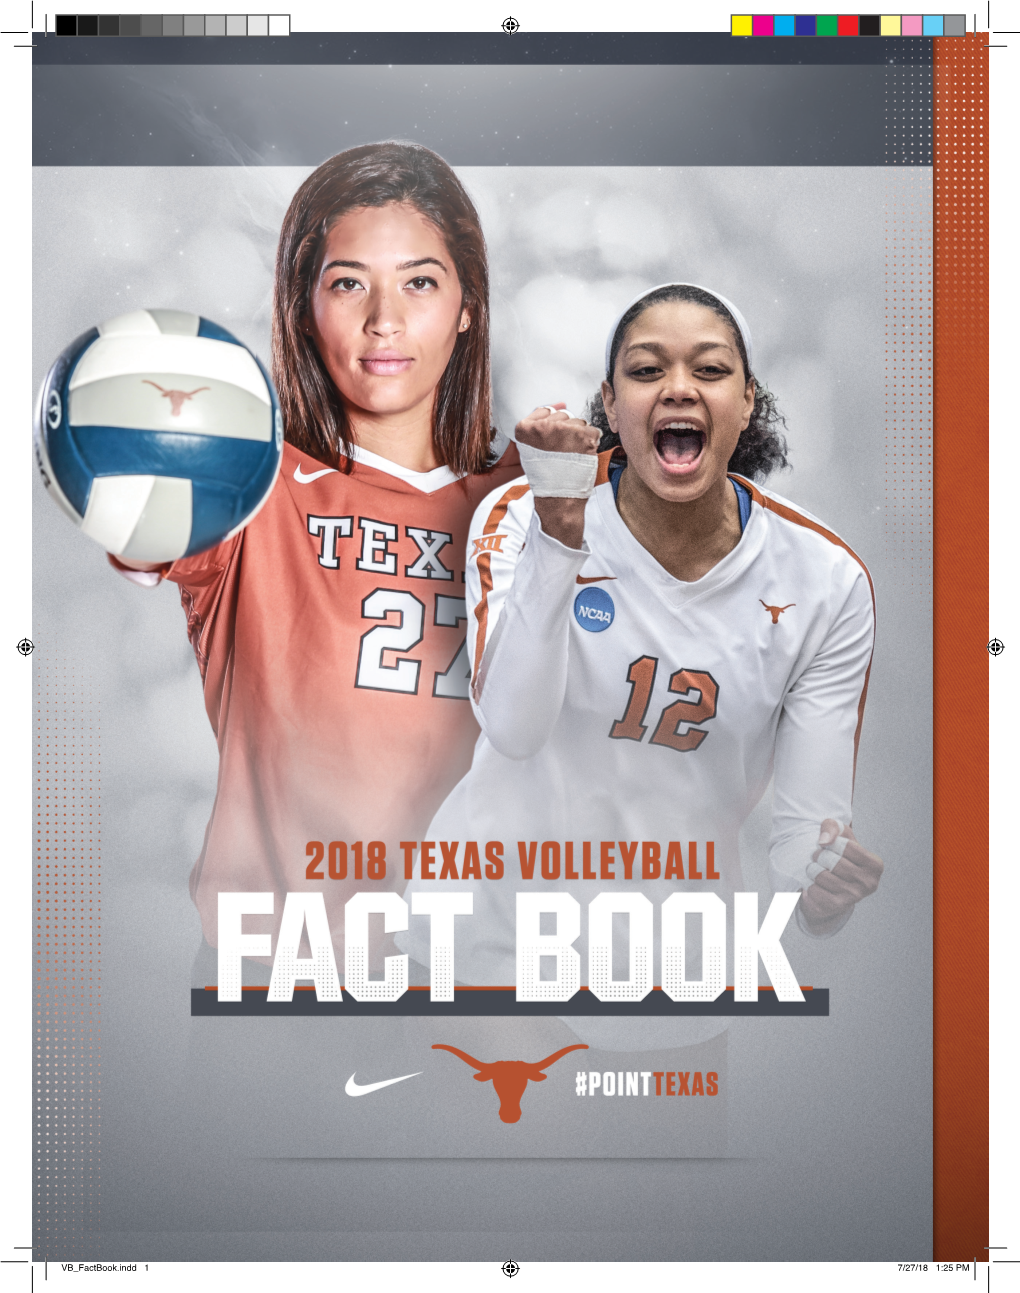 2018 Texas Volleyball Fact Book 2018 LONGHORNS HISTORY Quick Facts